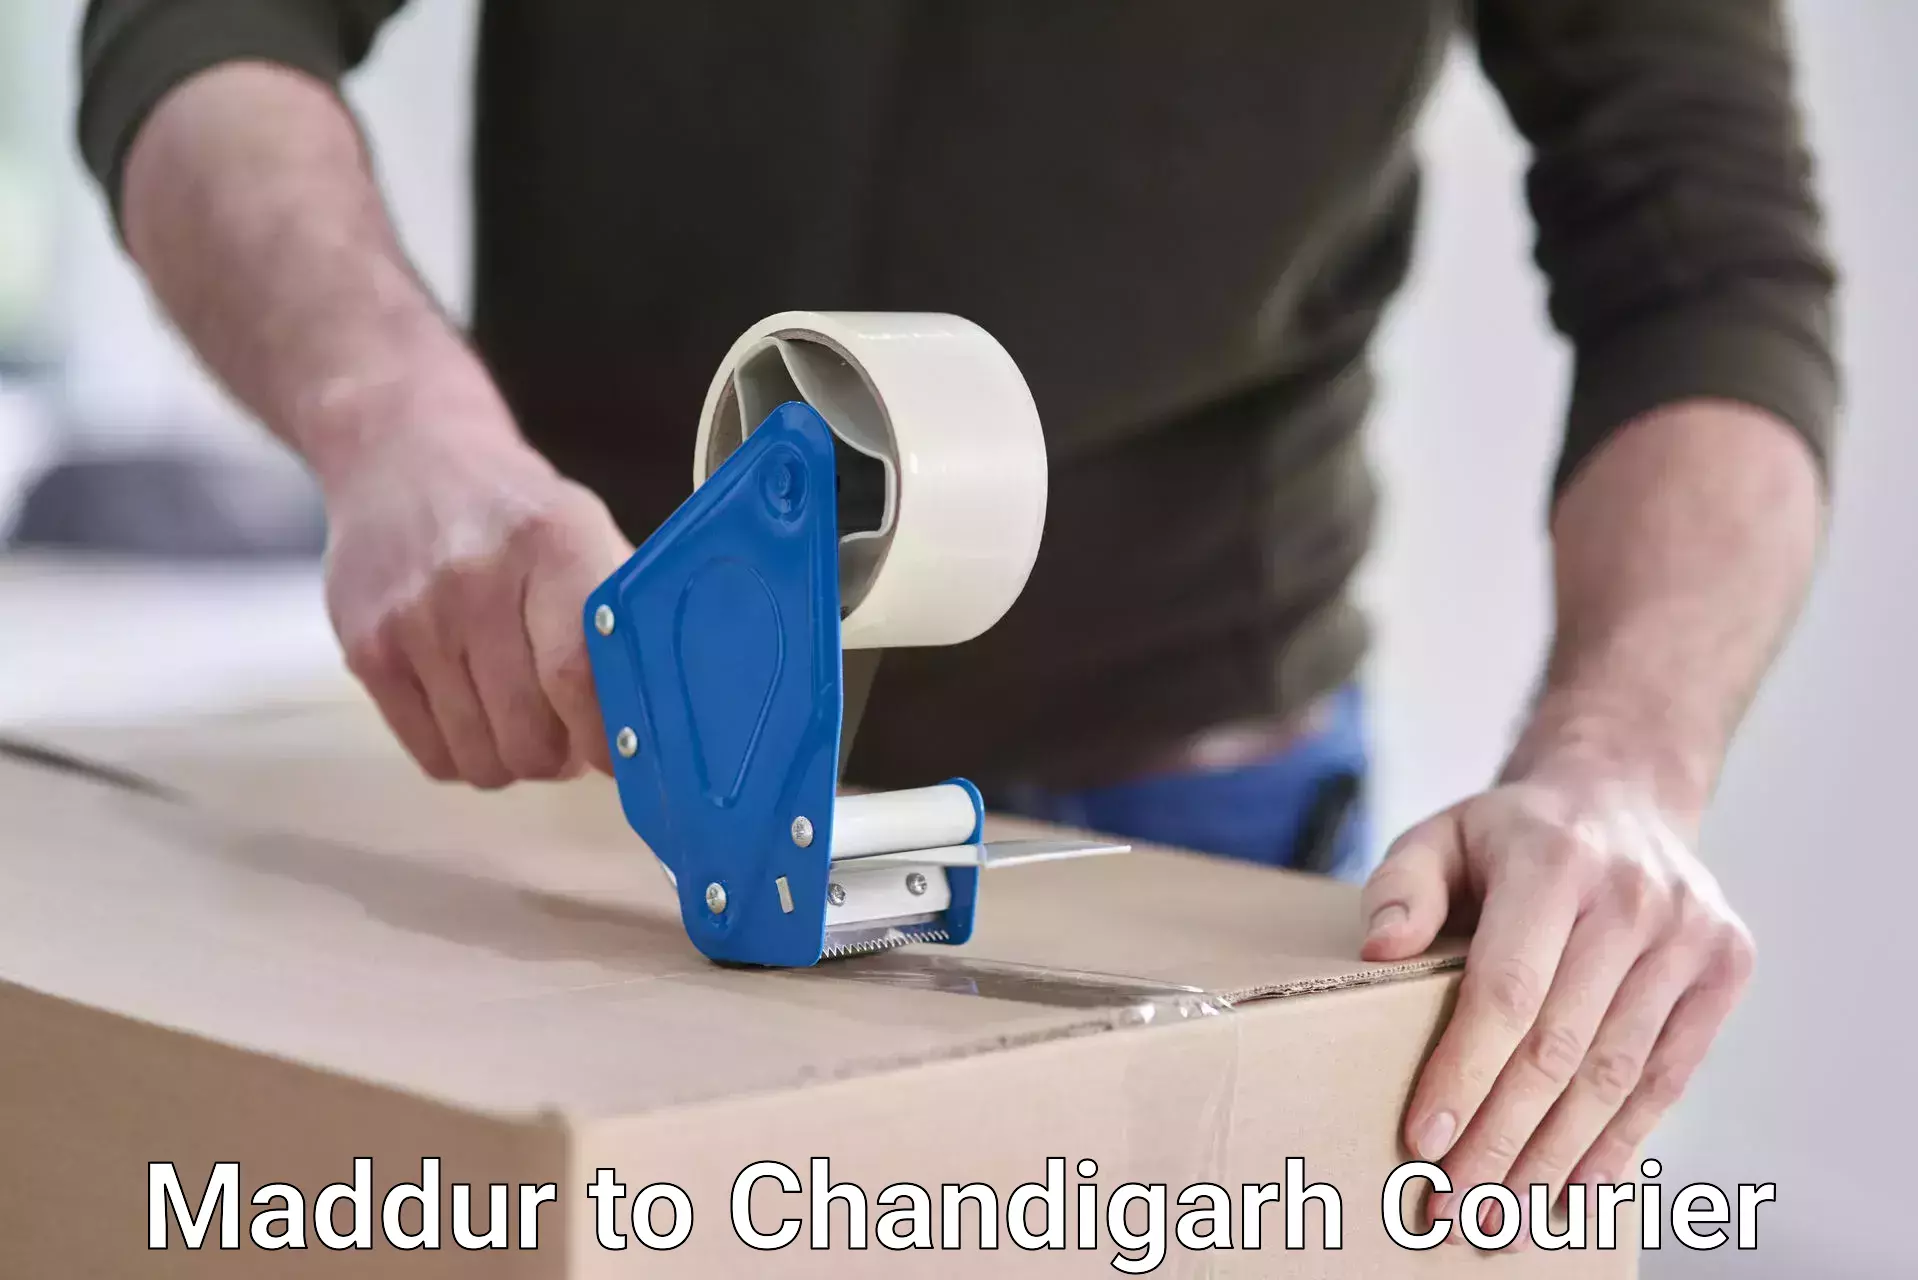 Advanced shipping services Maddur to Chandigarh